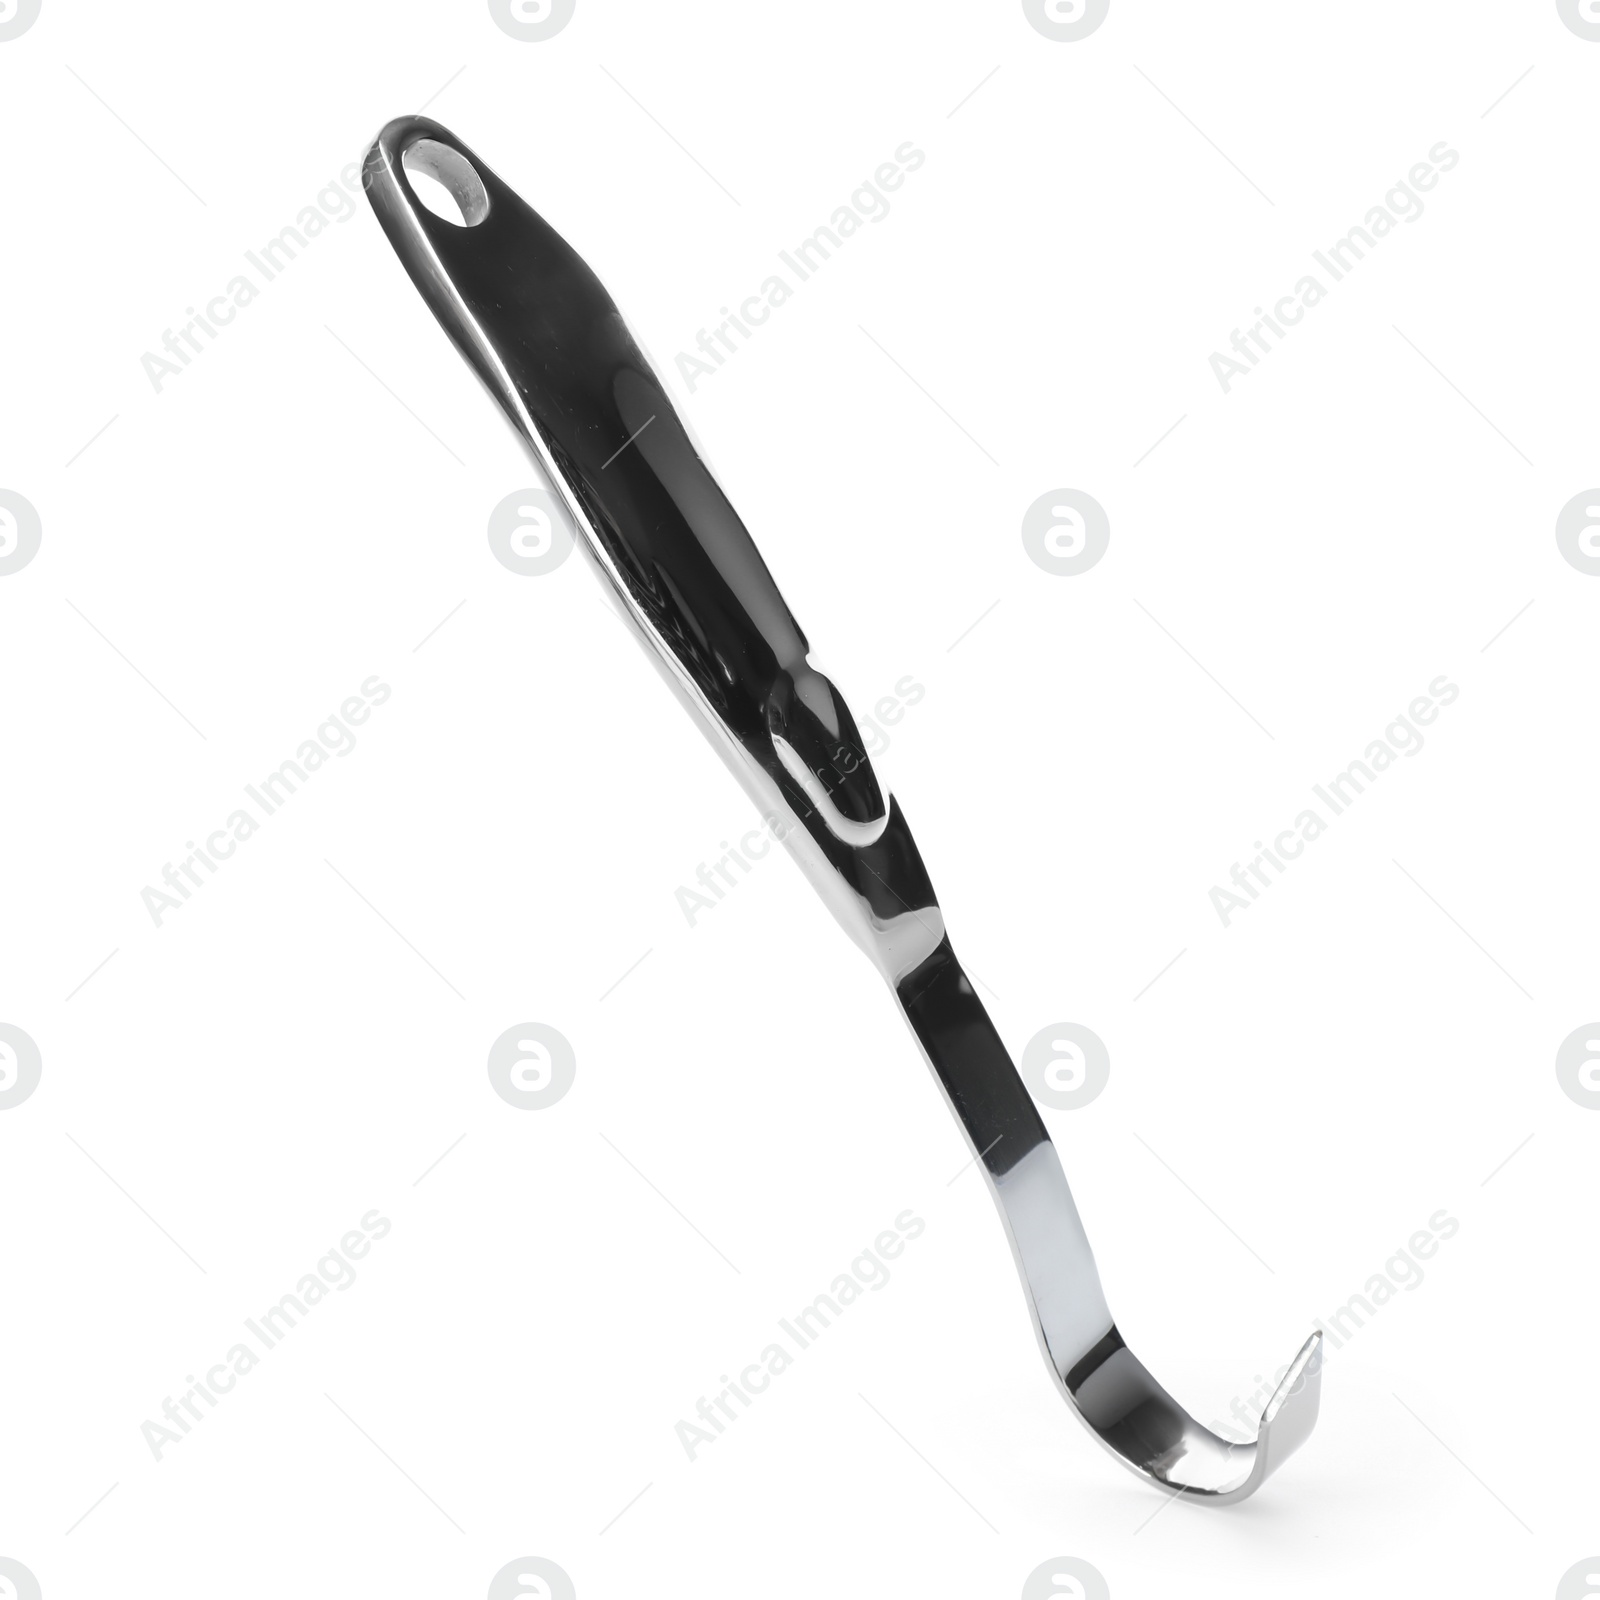 Photo of Stainless steel butter curler on white background. Kitchen utensils